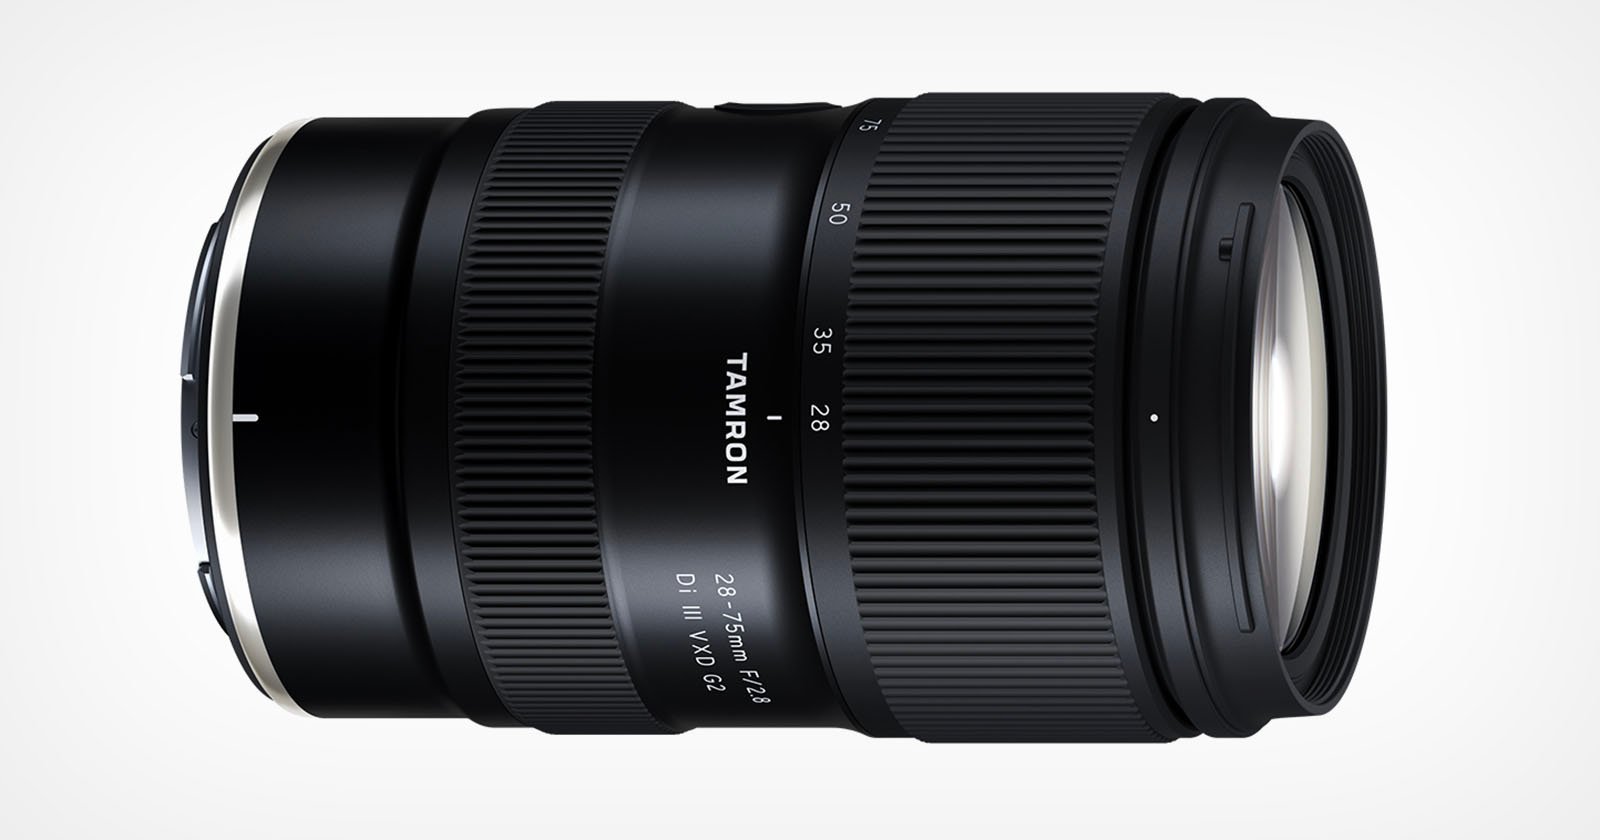 Tamron Brings Its Affordable, Excellent 28-75mm f/2.8 G2 Lens to Nikon Z